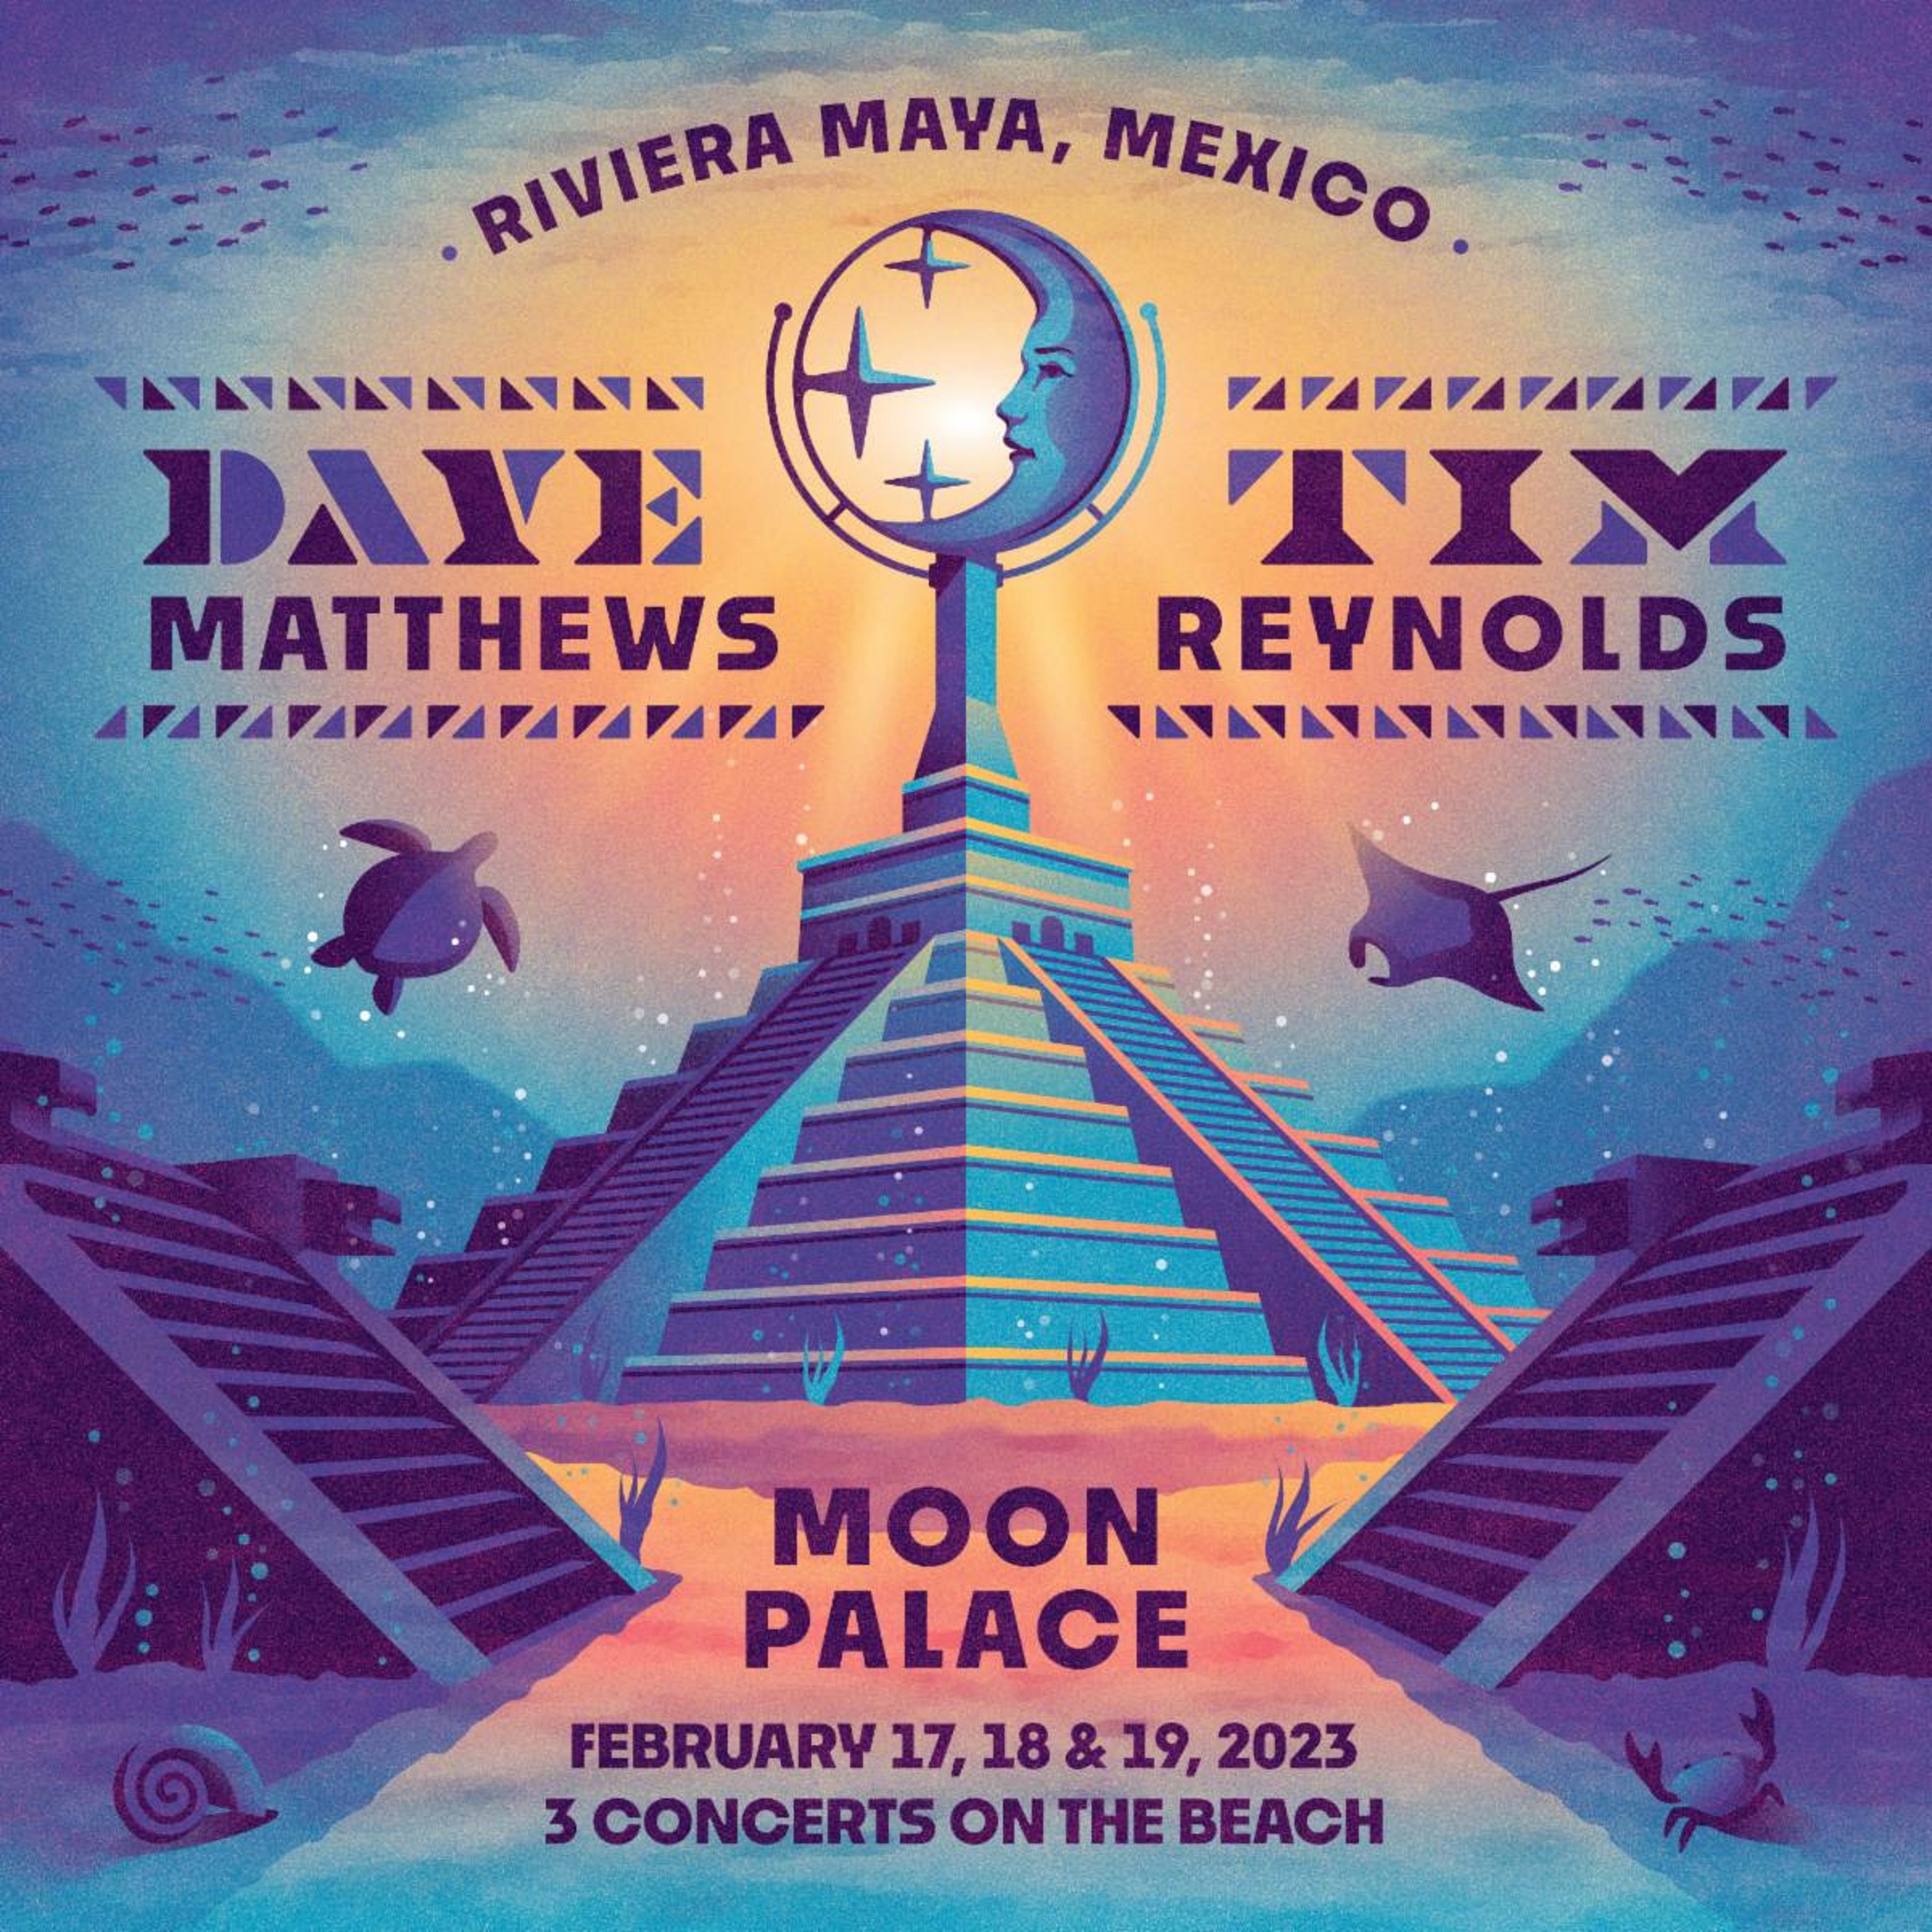 Dave Matthews And Tim Reynolds Announce Sixth Annual Riviera Maya Concerts